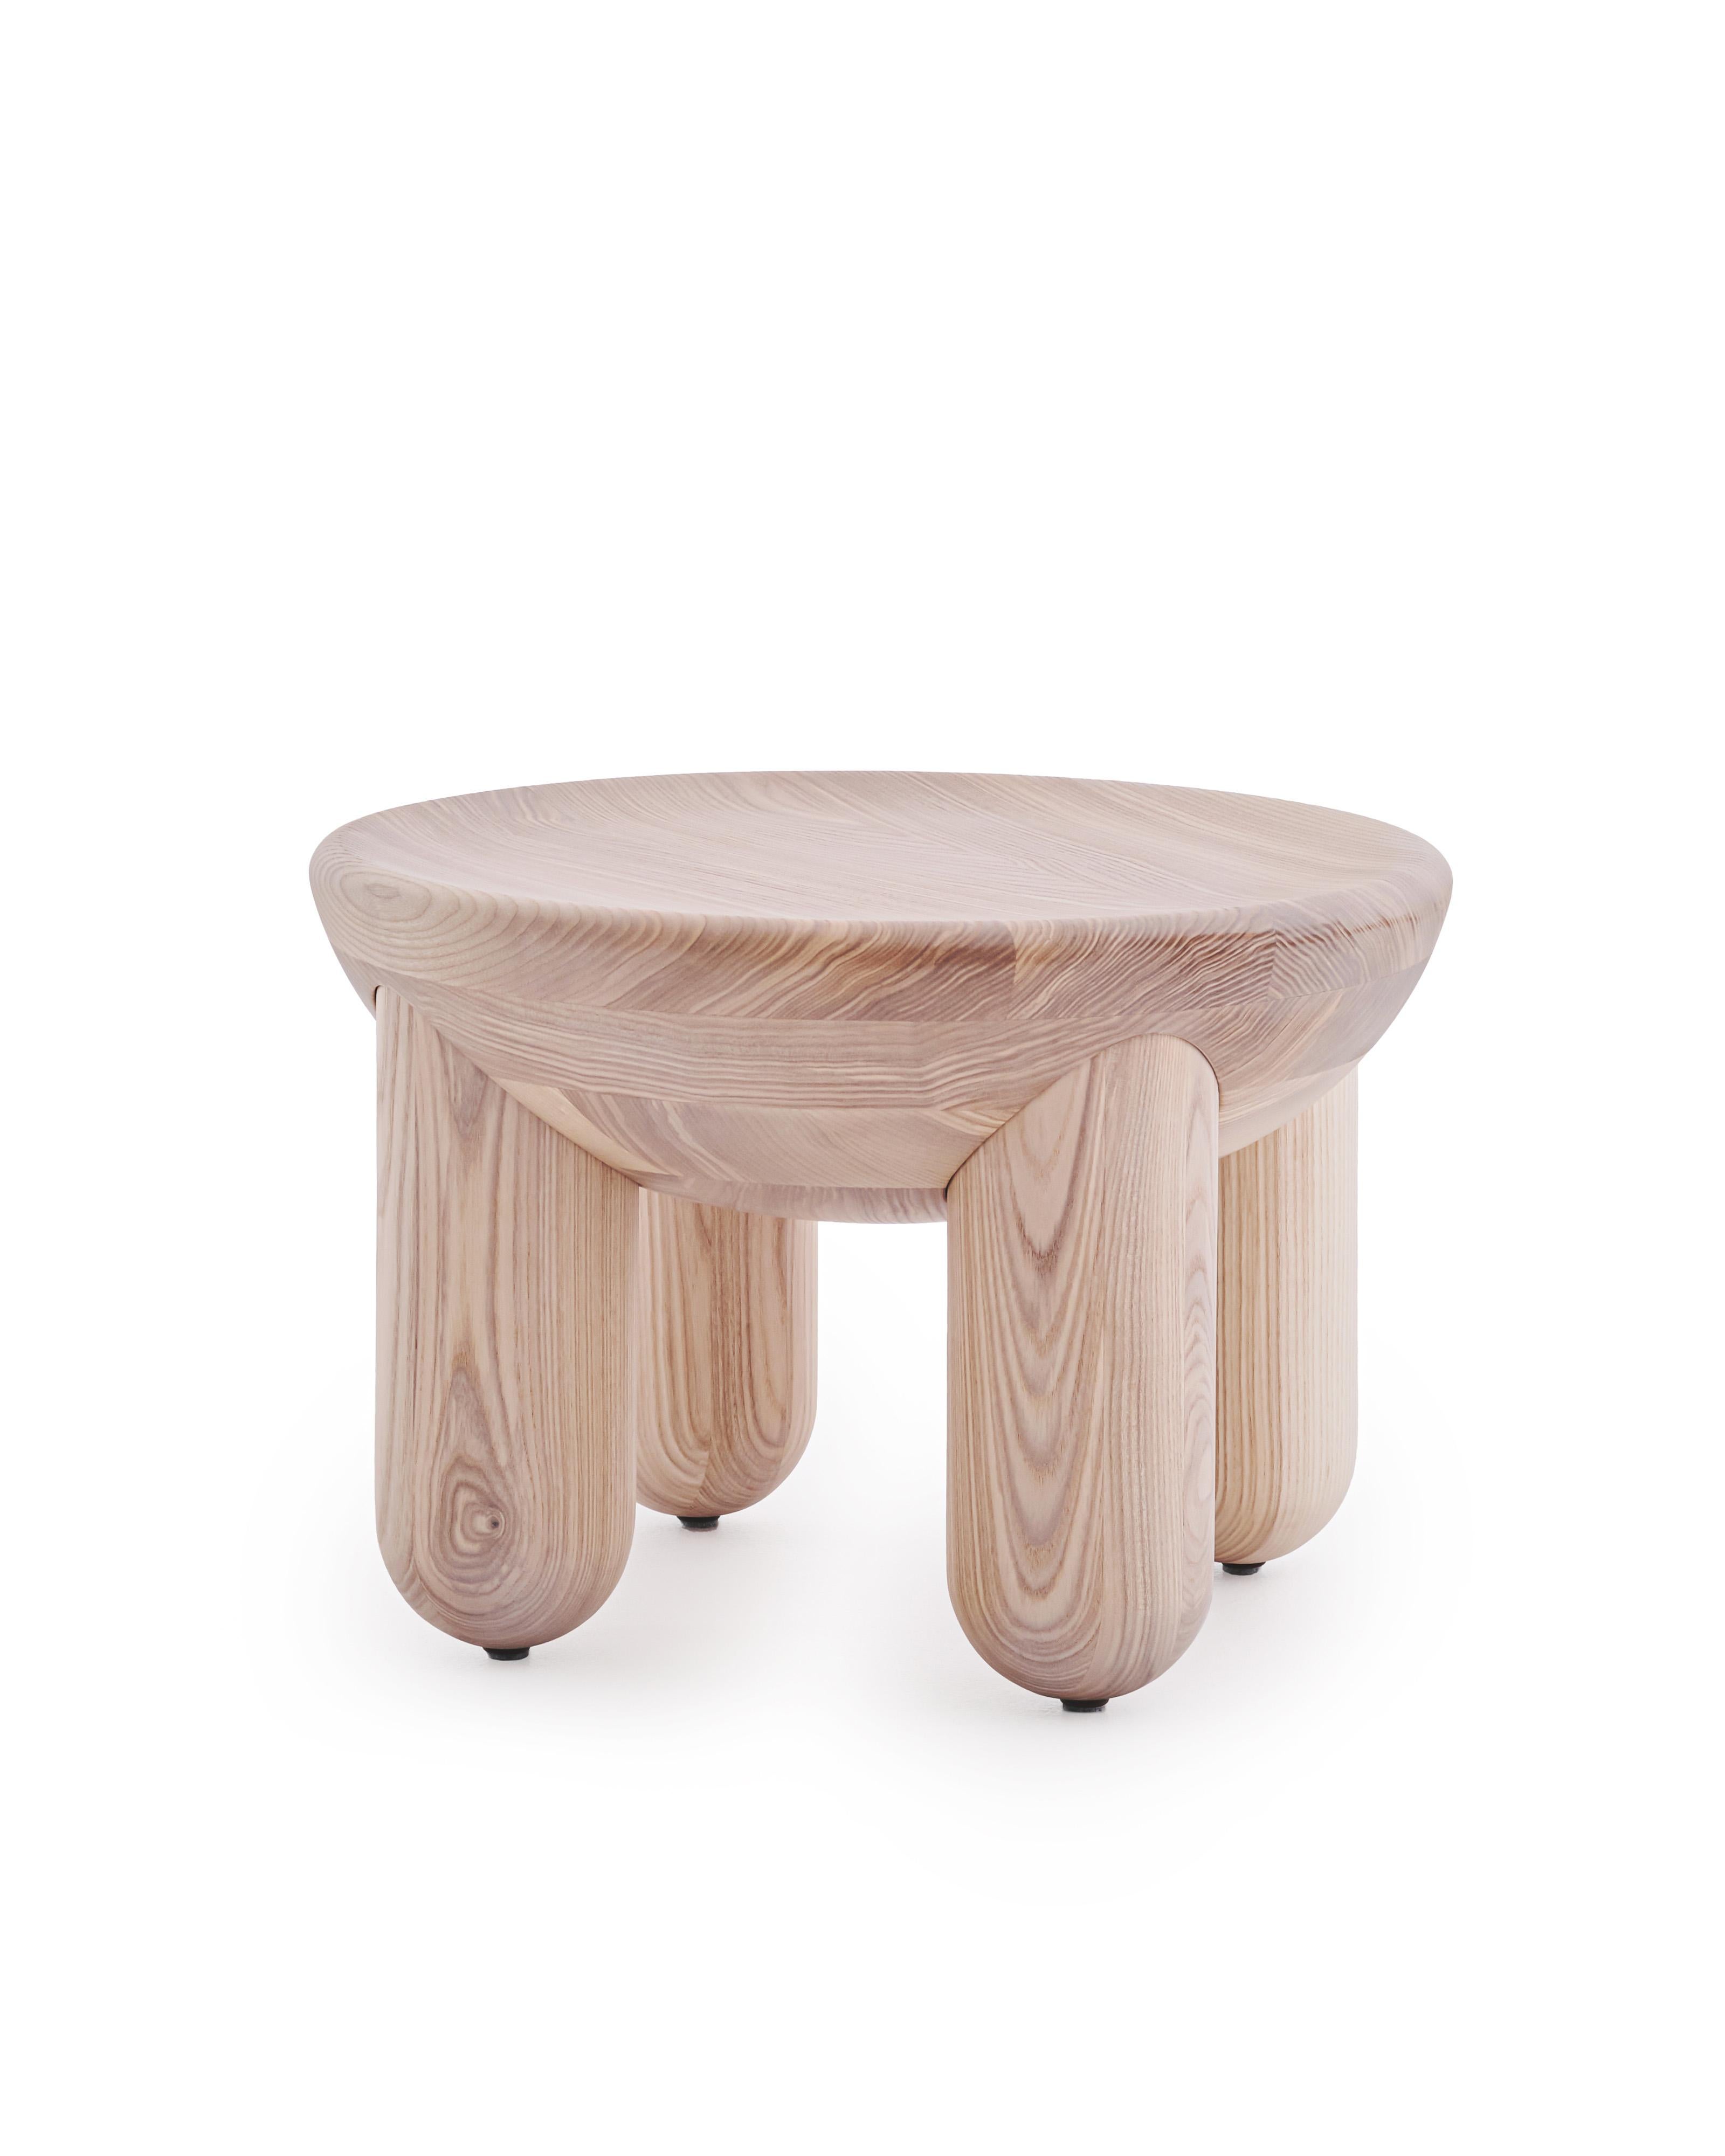 Ukrainian Wooden Coffee Table Freyja 1 in Natural Ash Finish by Noom